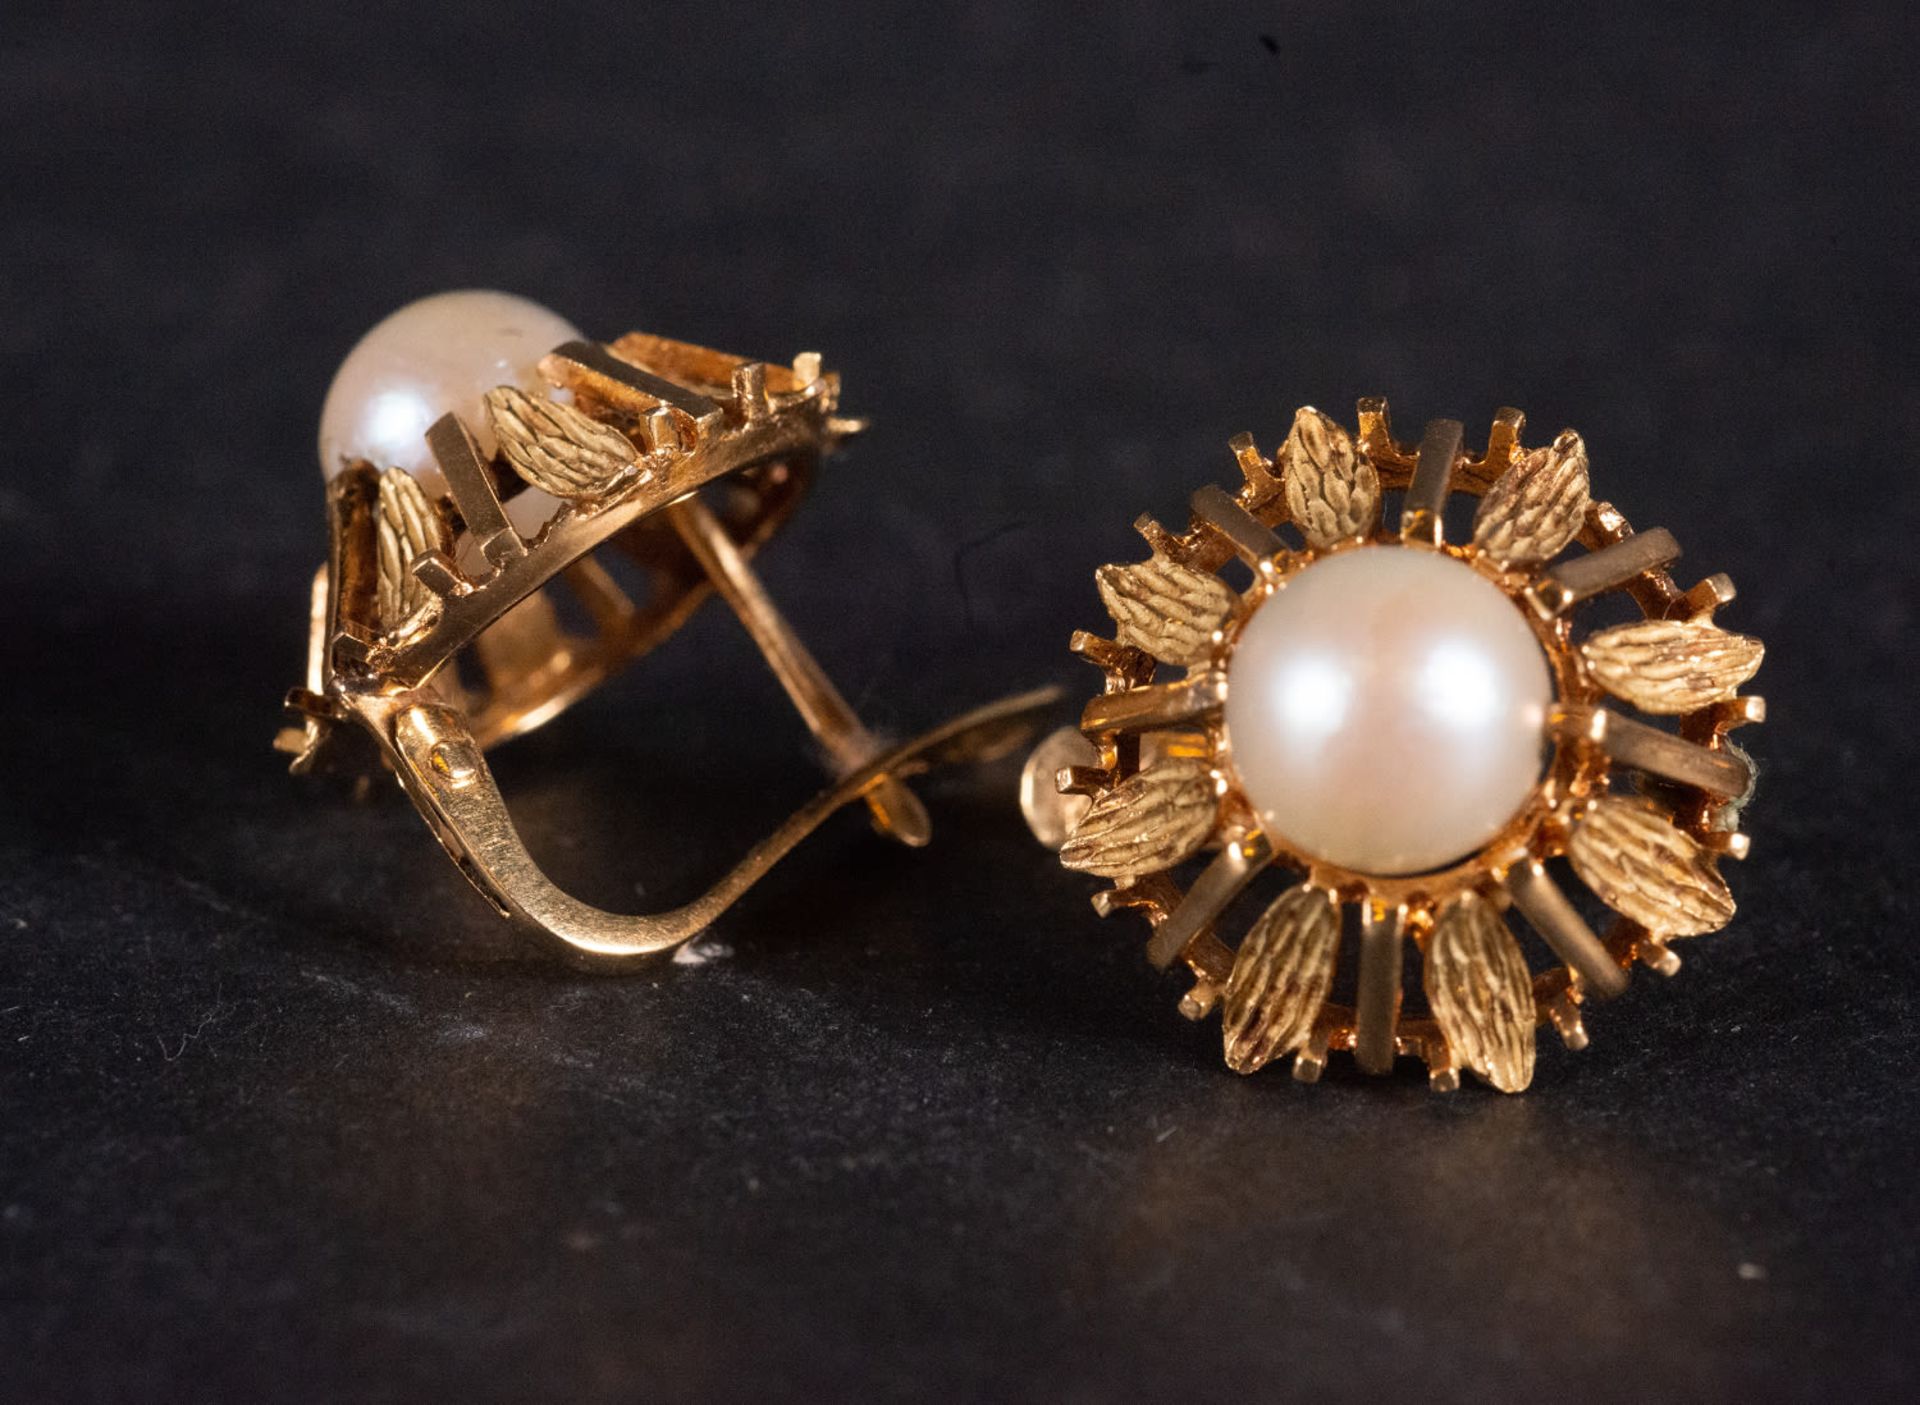 Gold and pearl earrings from the beginning of the 20th century - Image 4 of 4